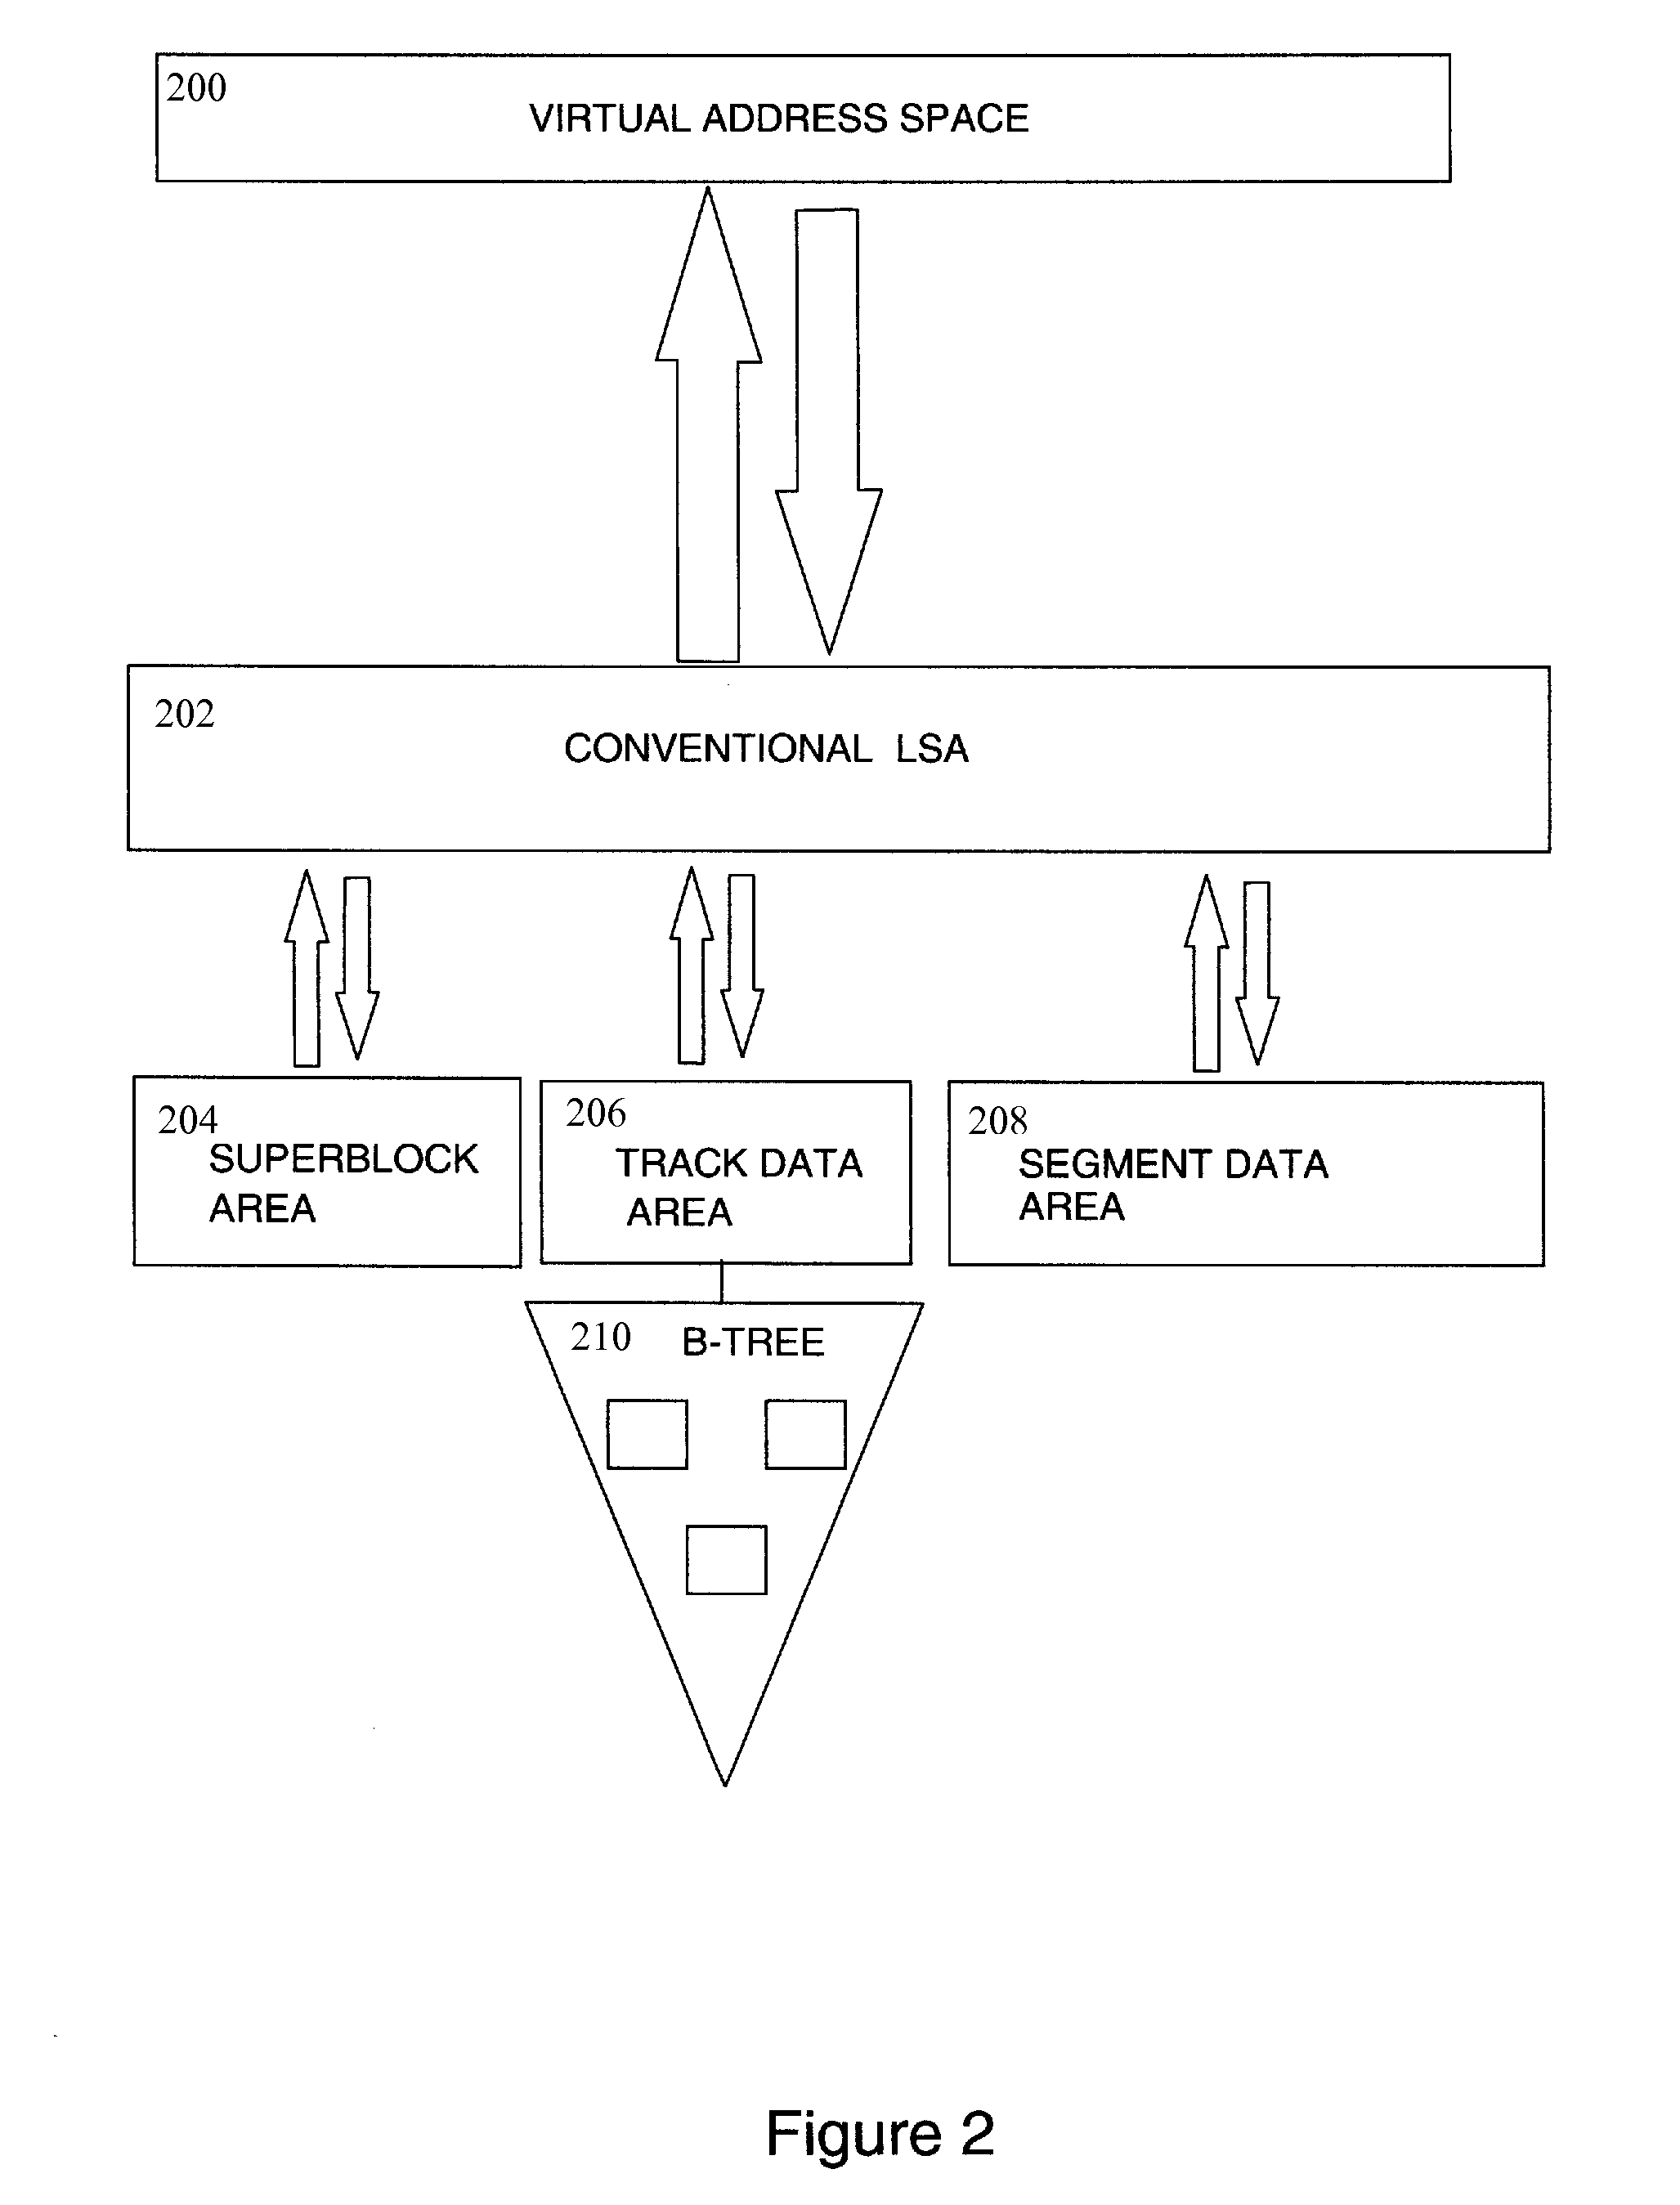 Apparatus and method for managing data storage